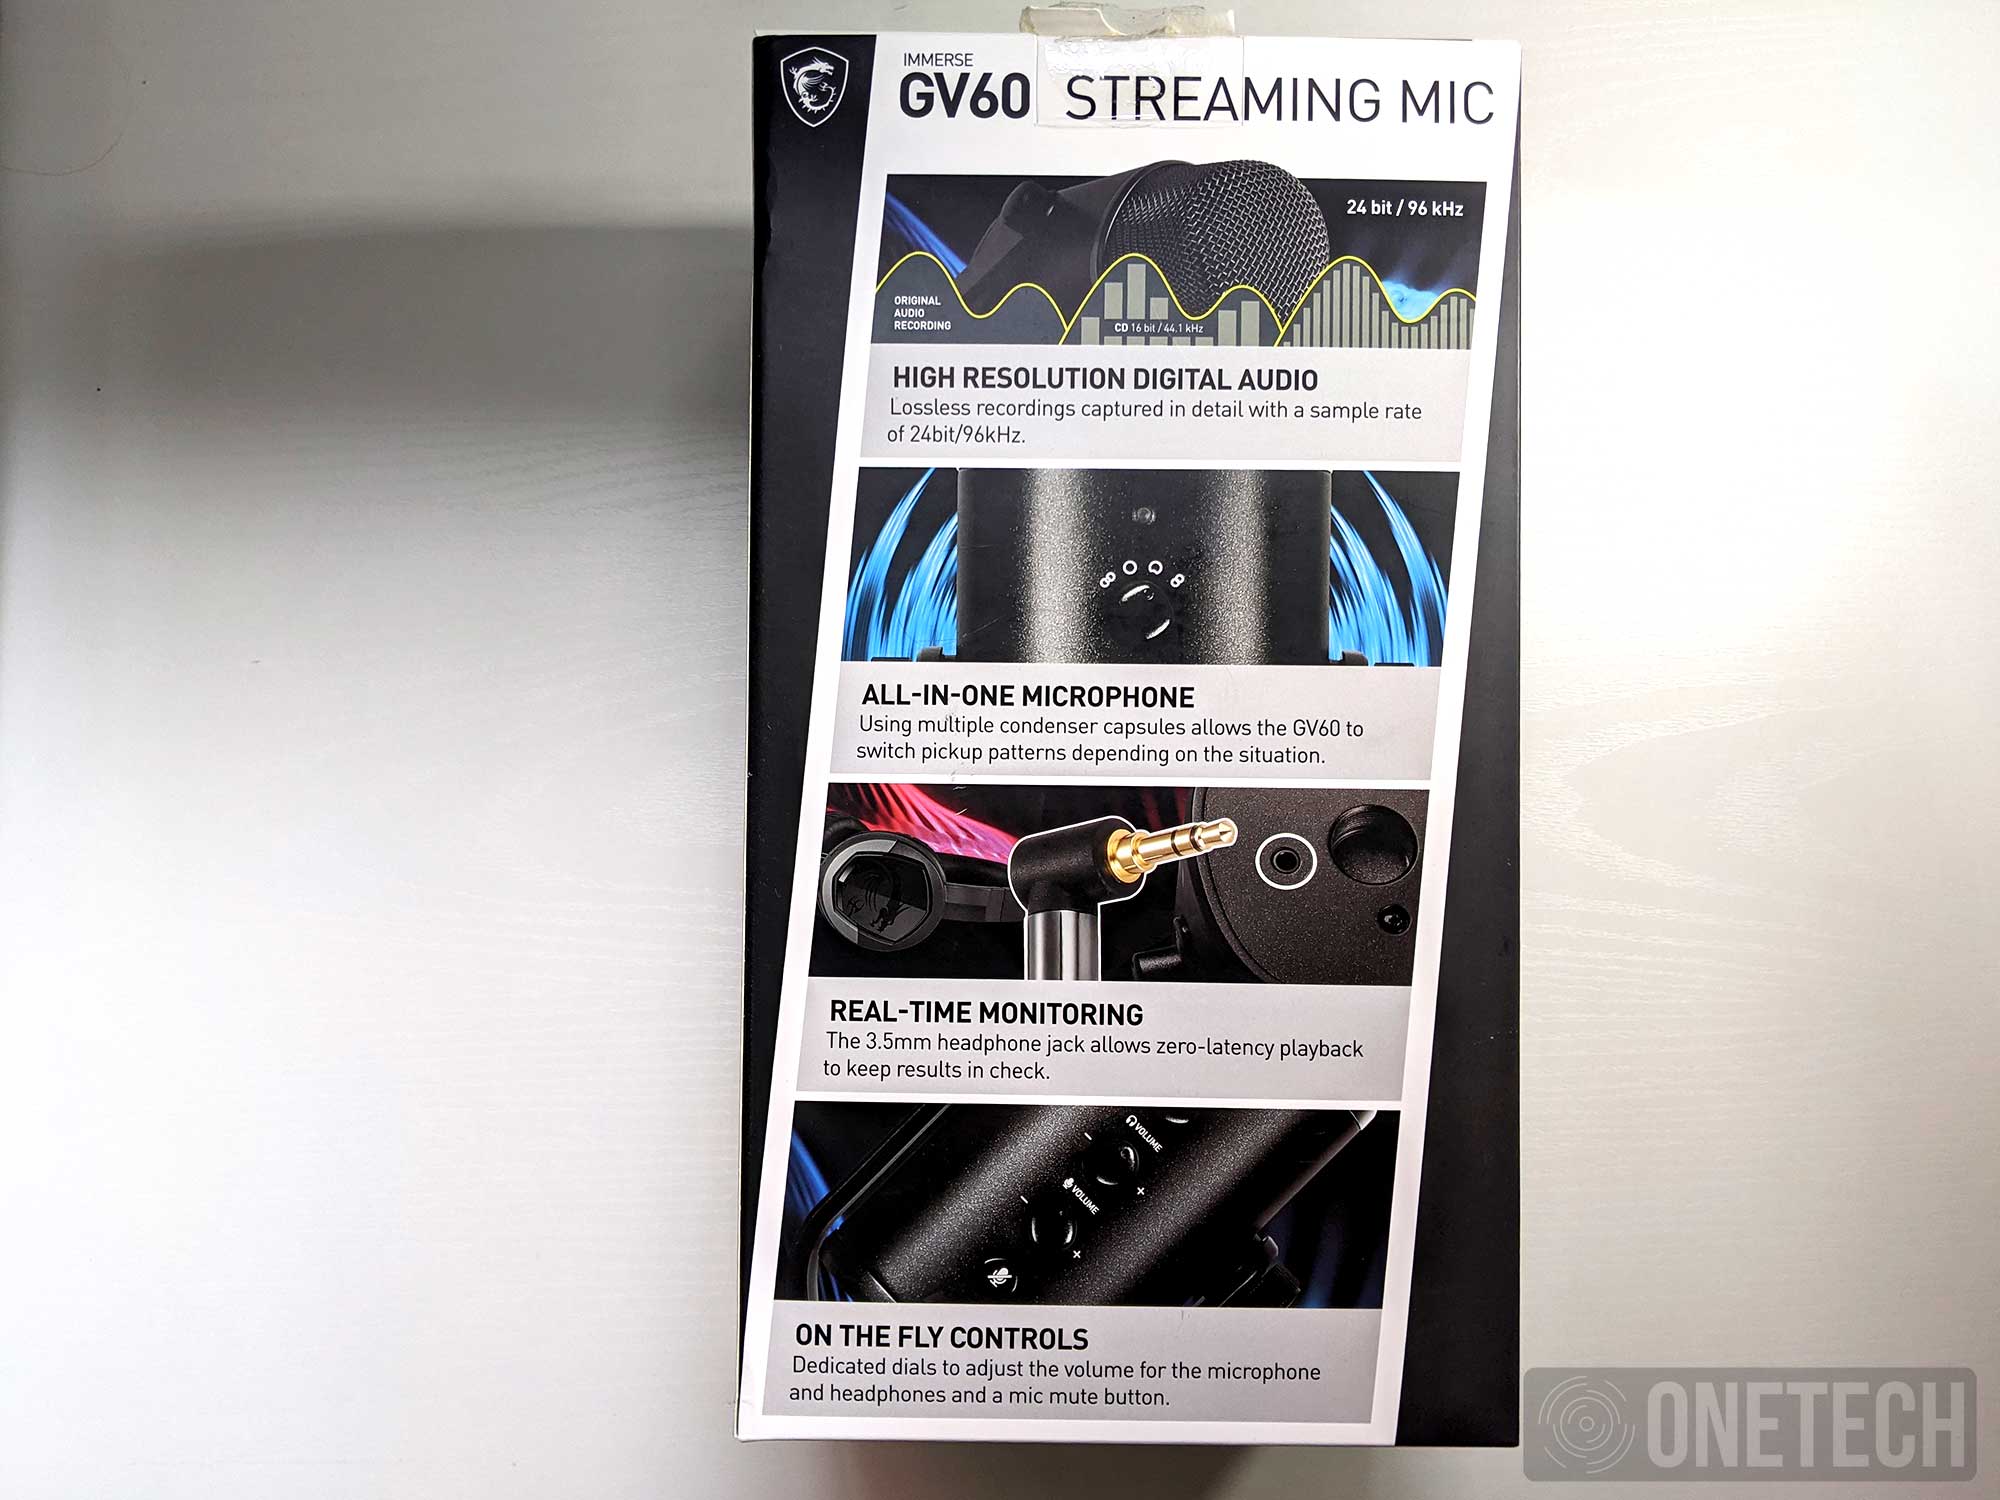 MSI Immerse GV60 Streaming MIC - Análisis completo y opinión 1